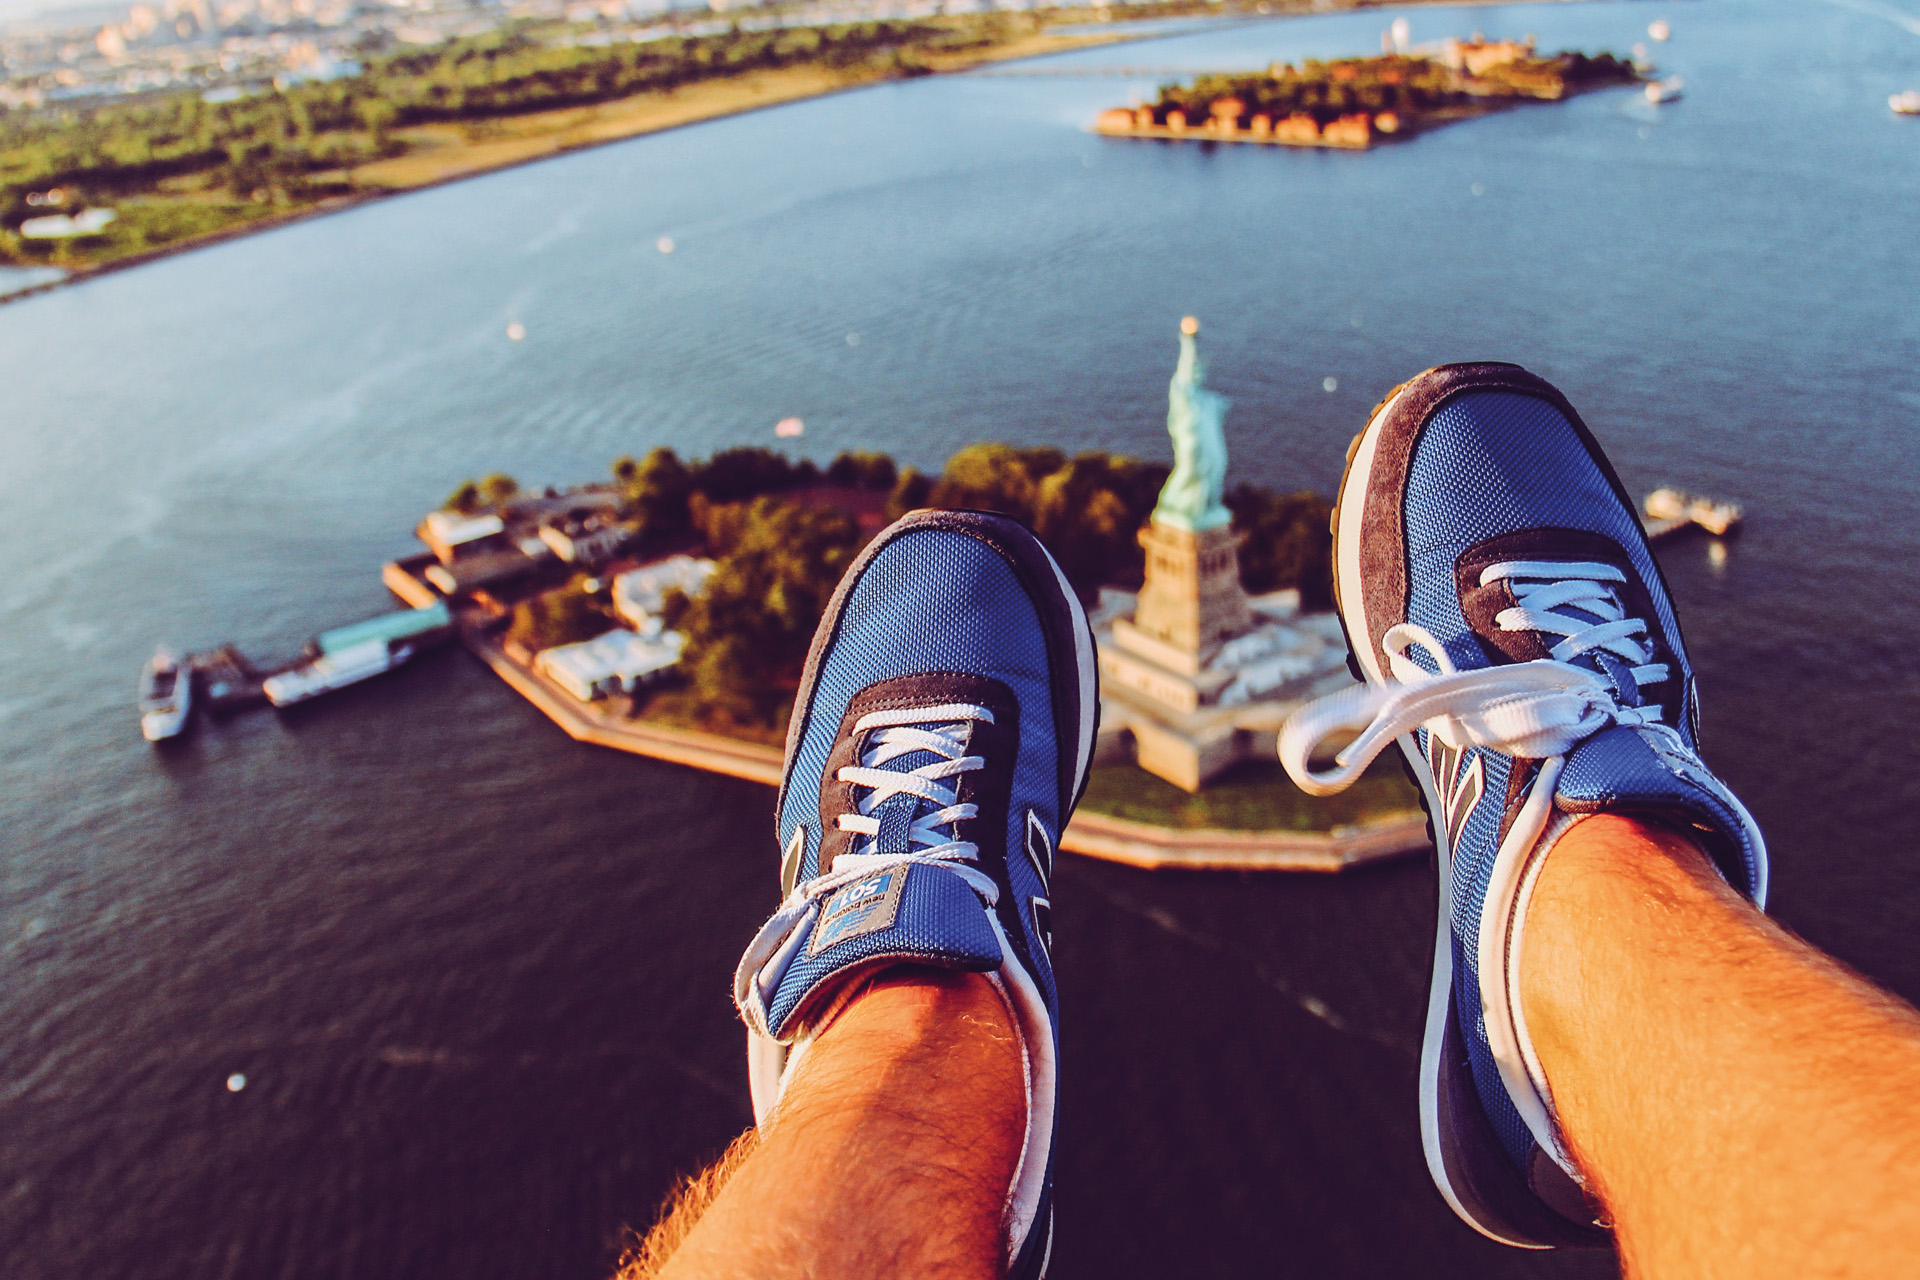 looking down on the statue of liberty with feet in the foreground